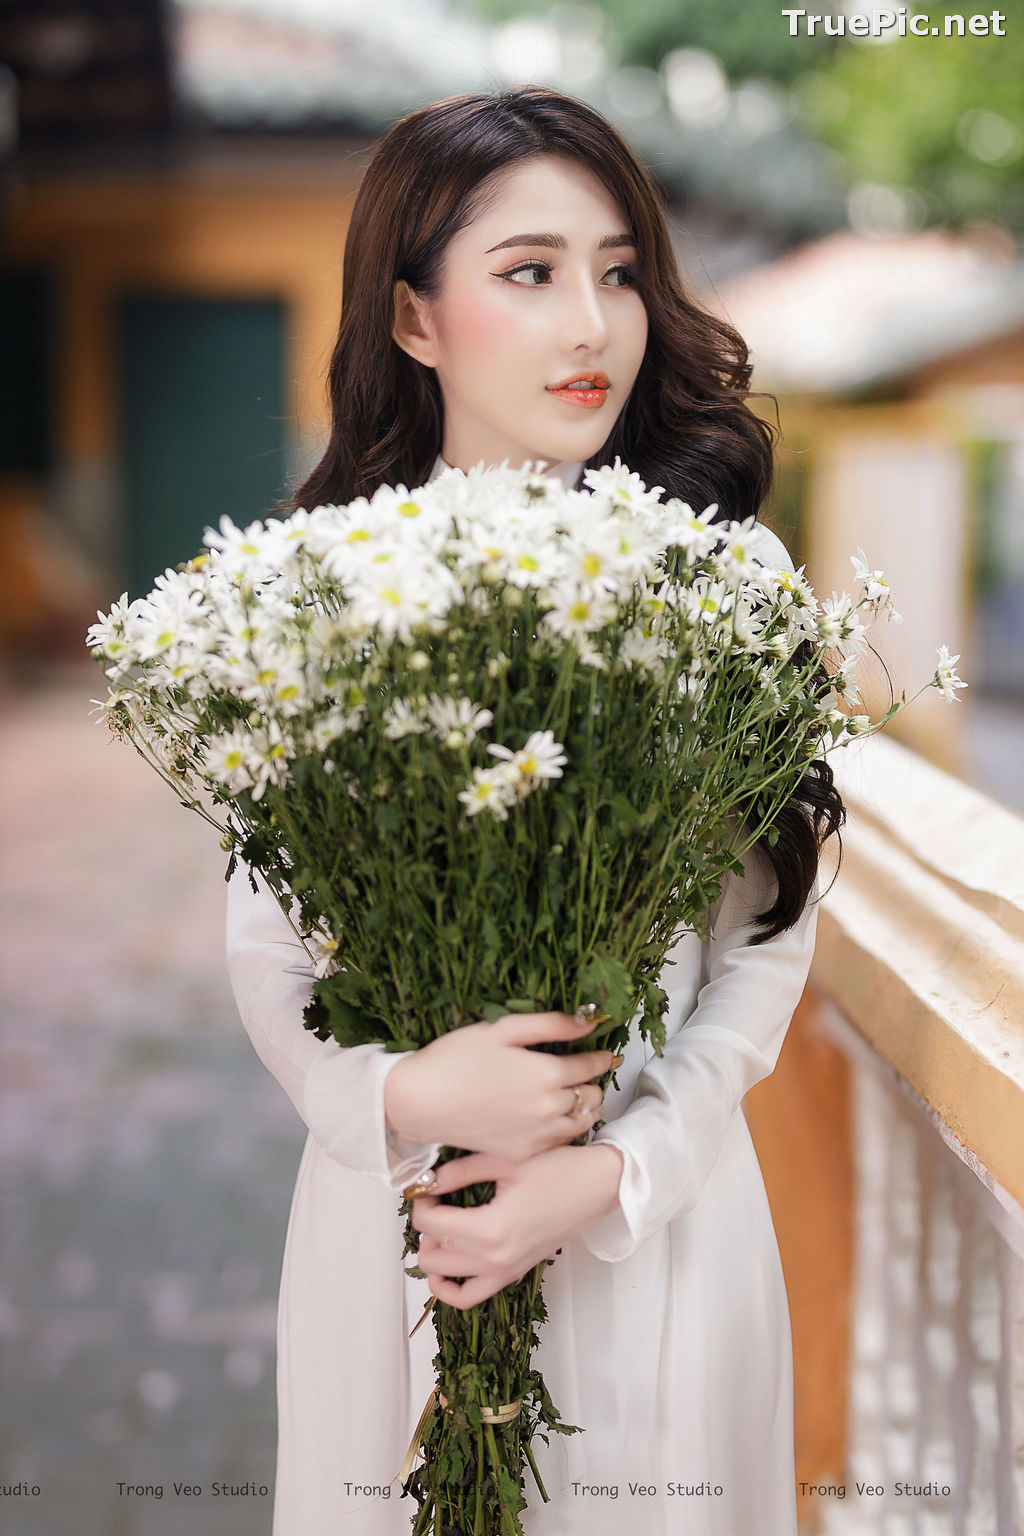 Image The Beauty of Vietnamese Girls with Traditional Dress (Ao Dai) #3 - TruePic.net - Picture-24